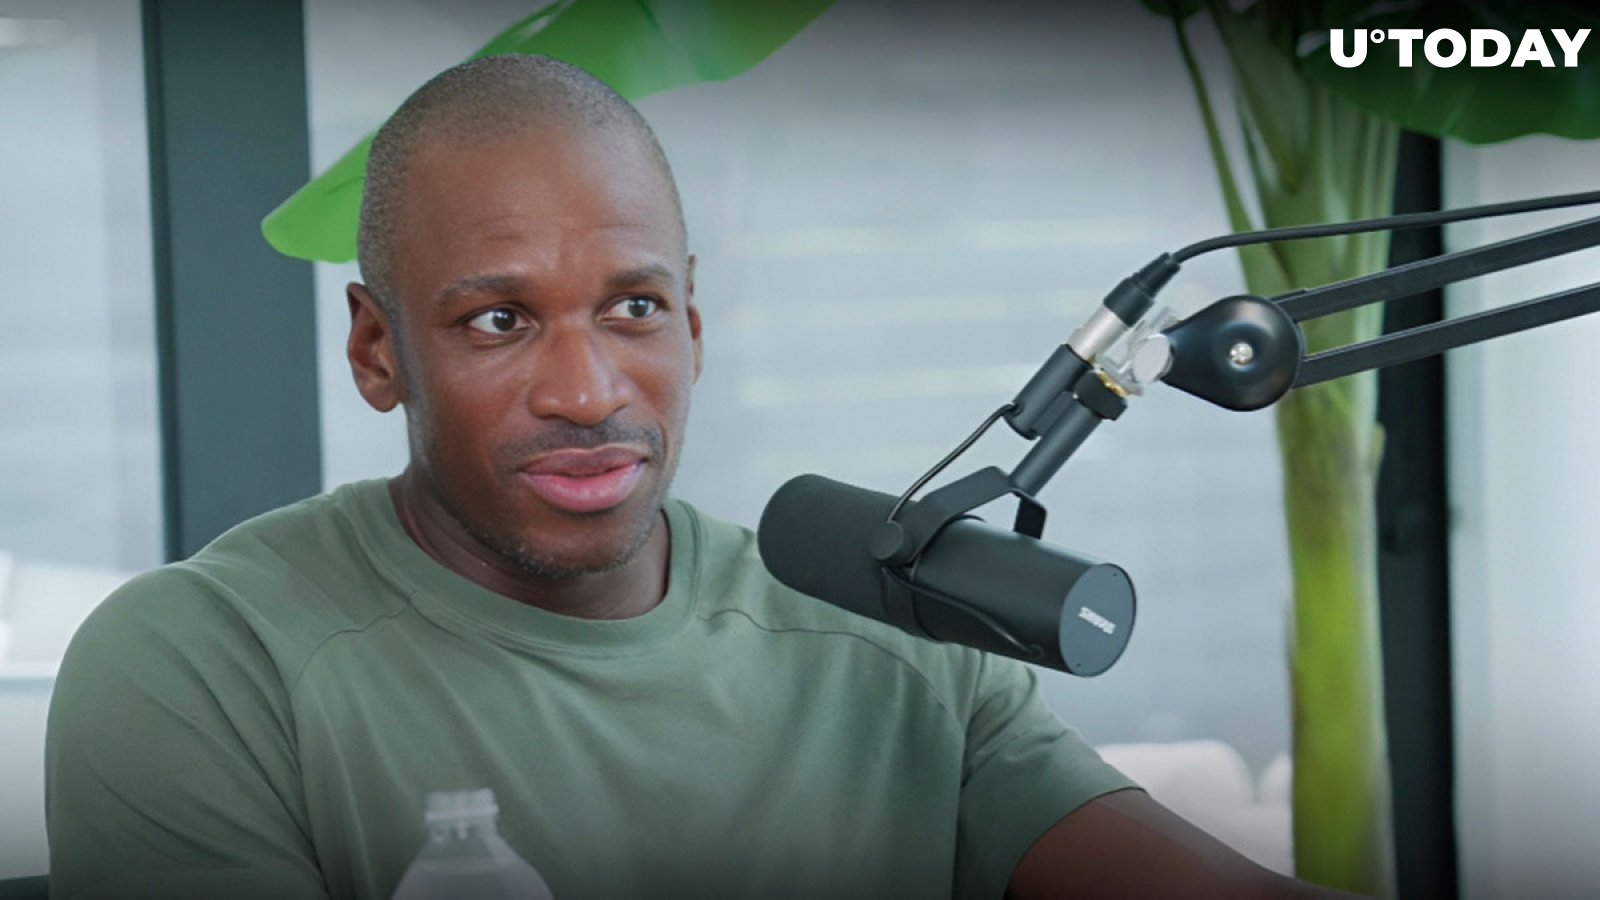 BitMEX Founder Arthur Hayes on JPY, BTC Moves: 'Time to Go Shopping'